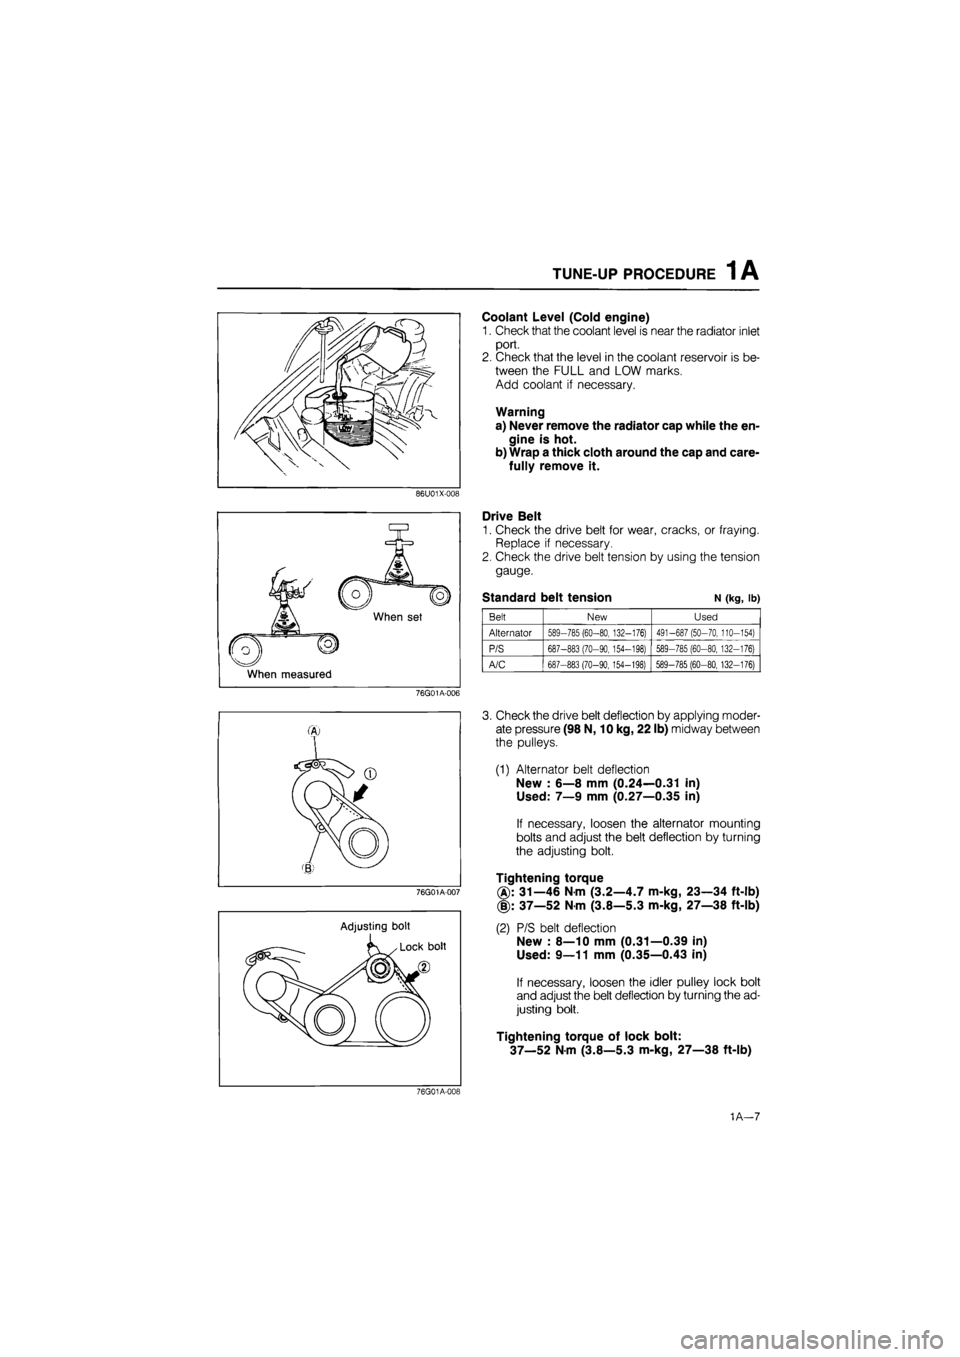 MAZDA 626 1987 Owners Guide 
1A TUNE-UP PROCEDURE 
Coolant Level (Cold engine) 
1. Check that the coolant level is near the radiator inlet 
port. 
2. Check that the level in the coolant reservoir is be-
tween the FULL and LOW ma